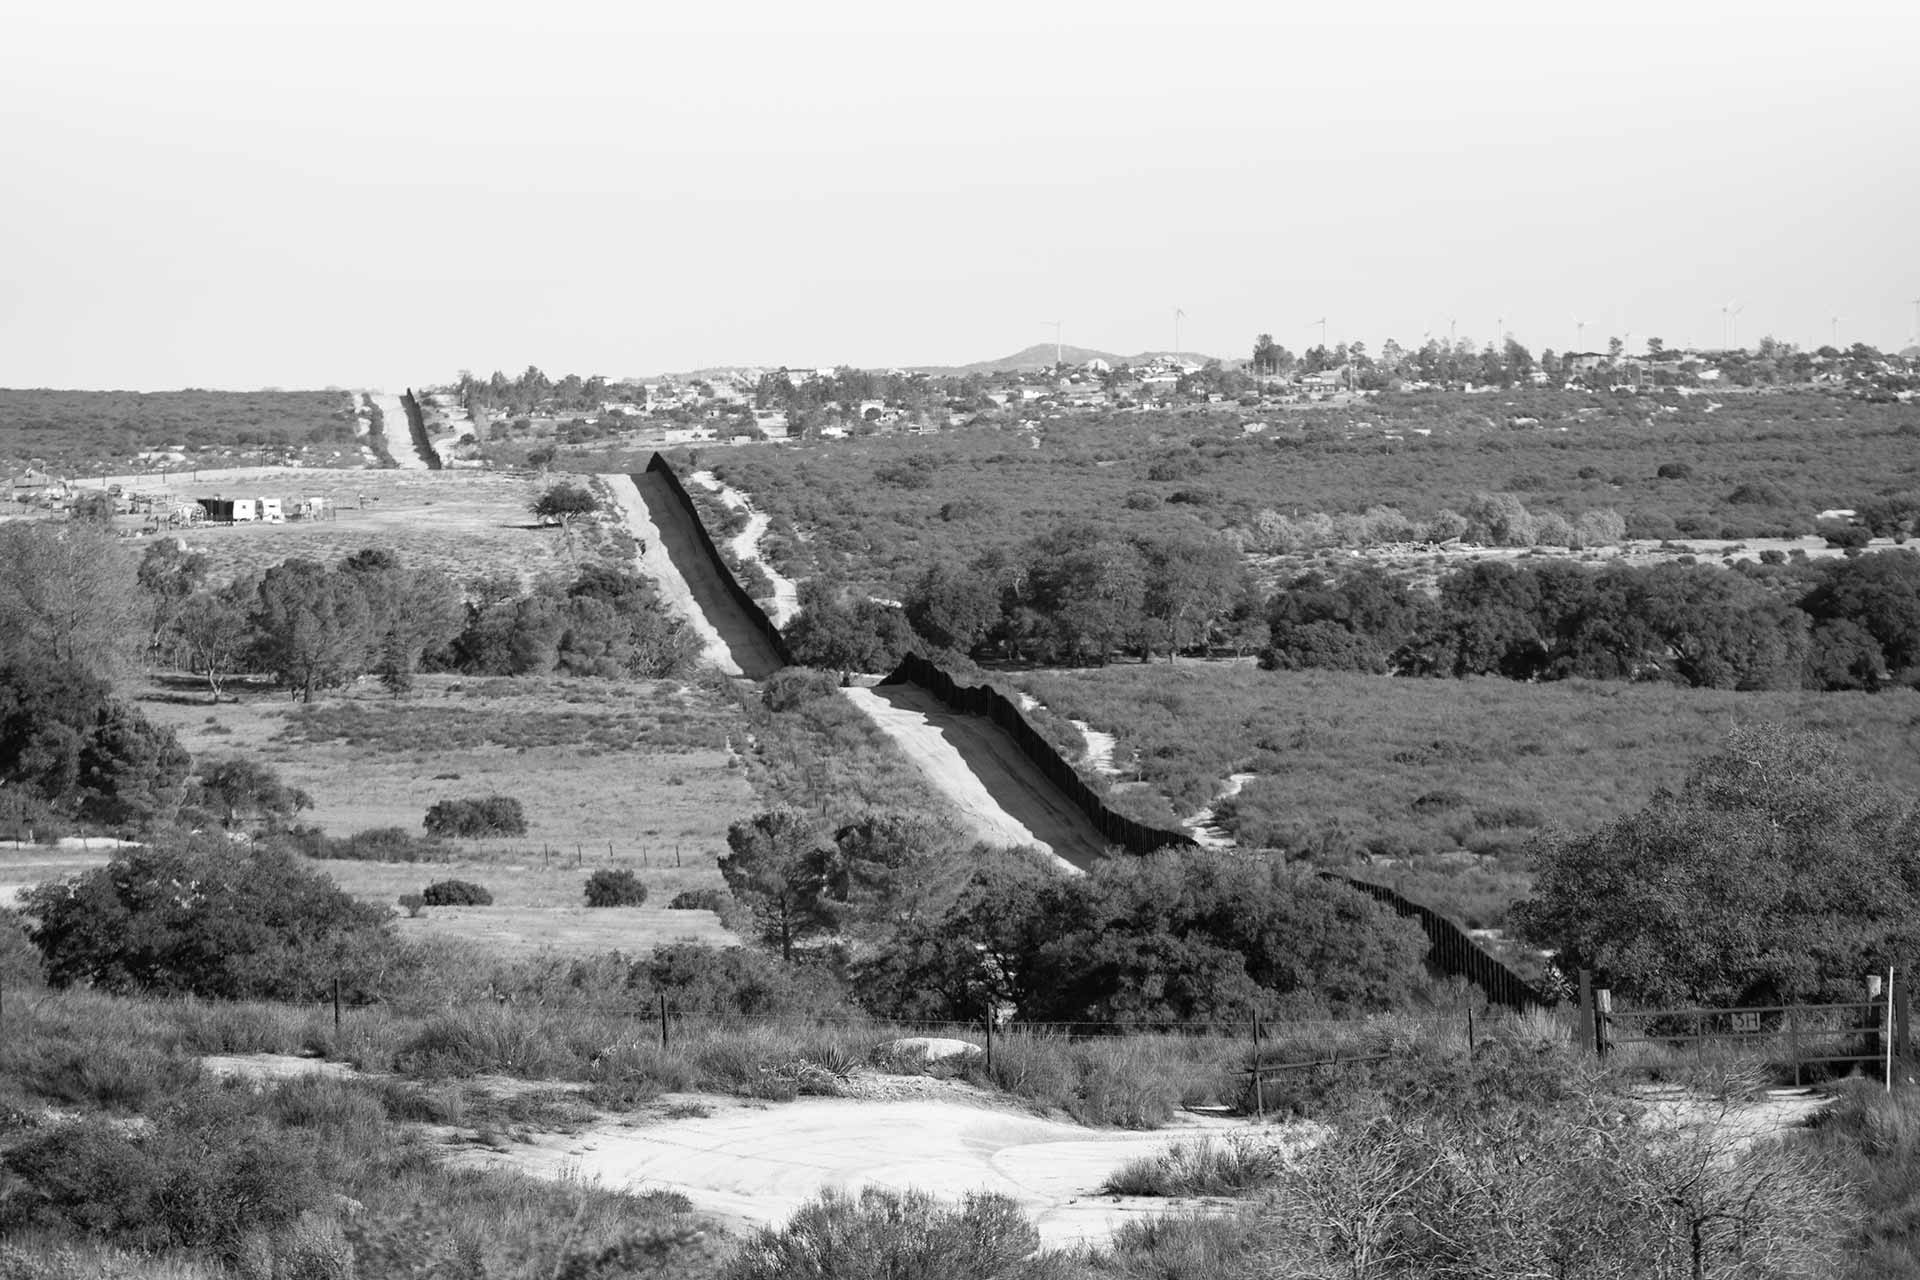 Panoramic view of existing border fence in the desert.